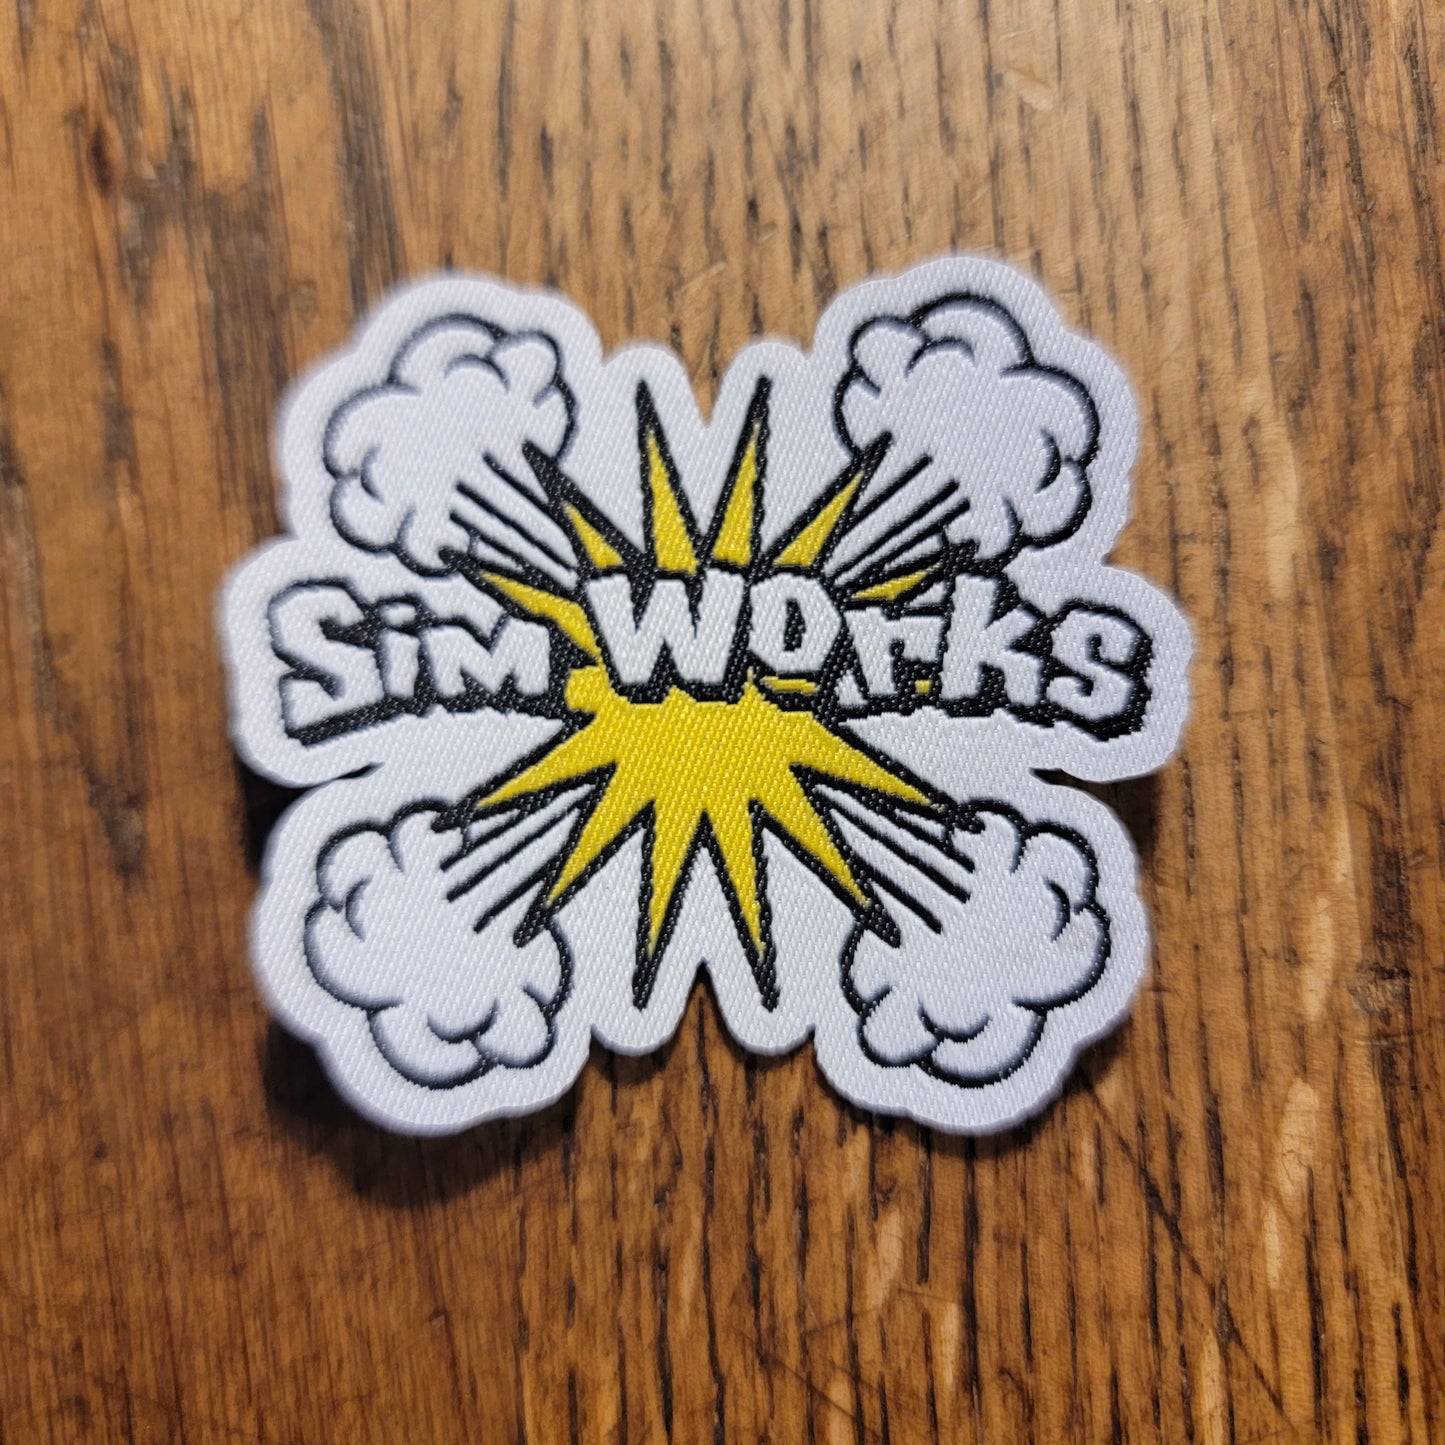 SimWorks Explosion Patch